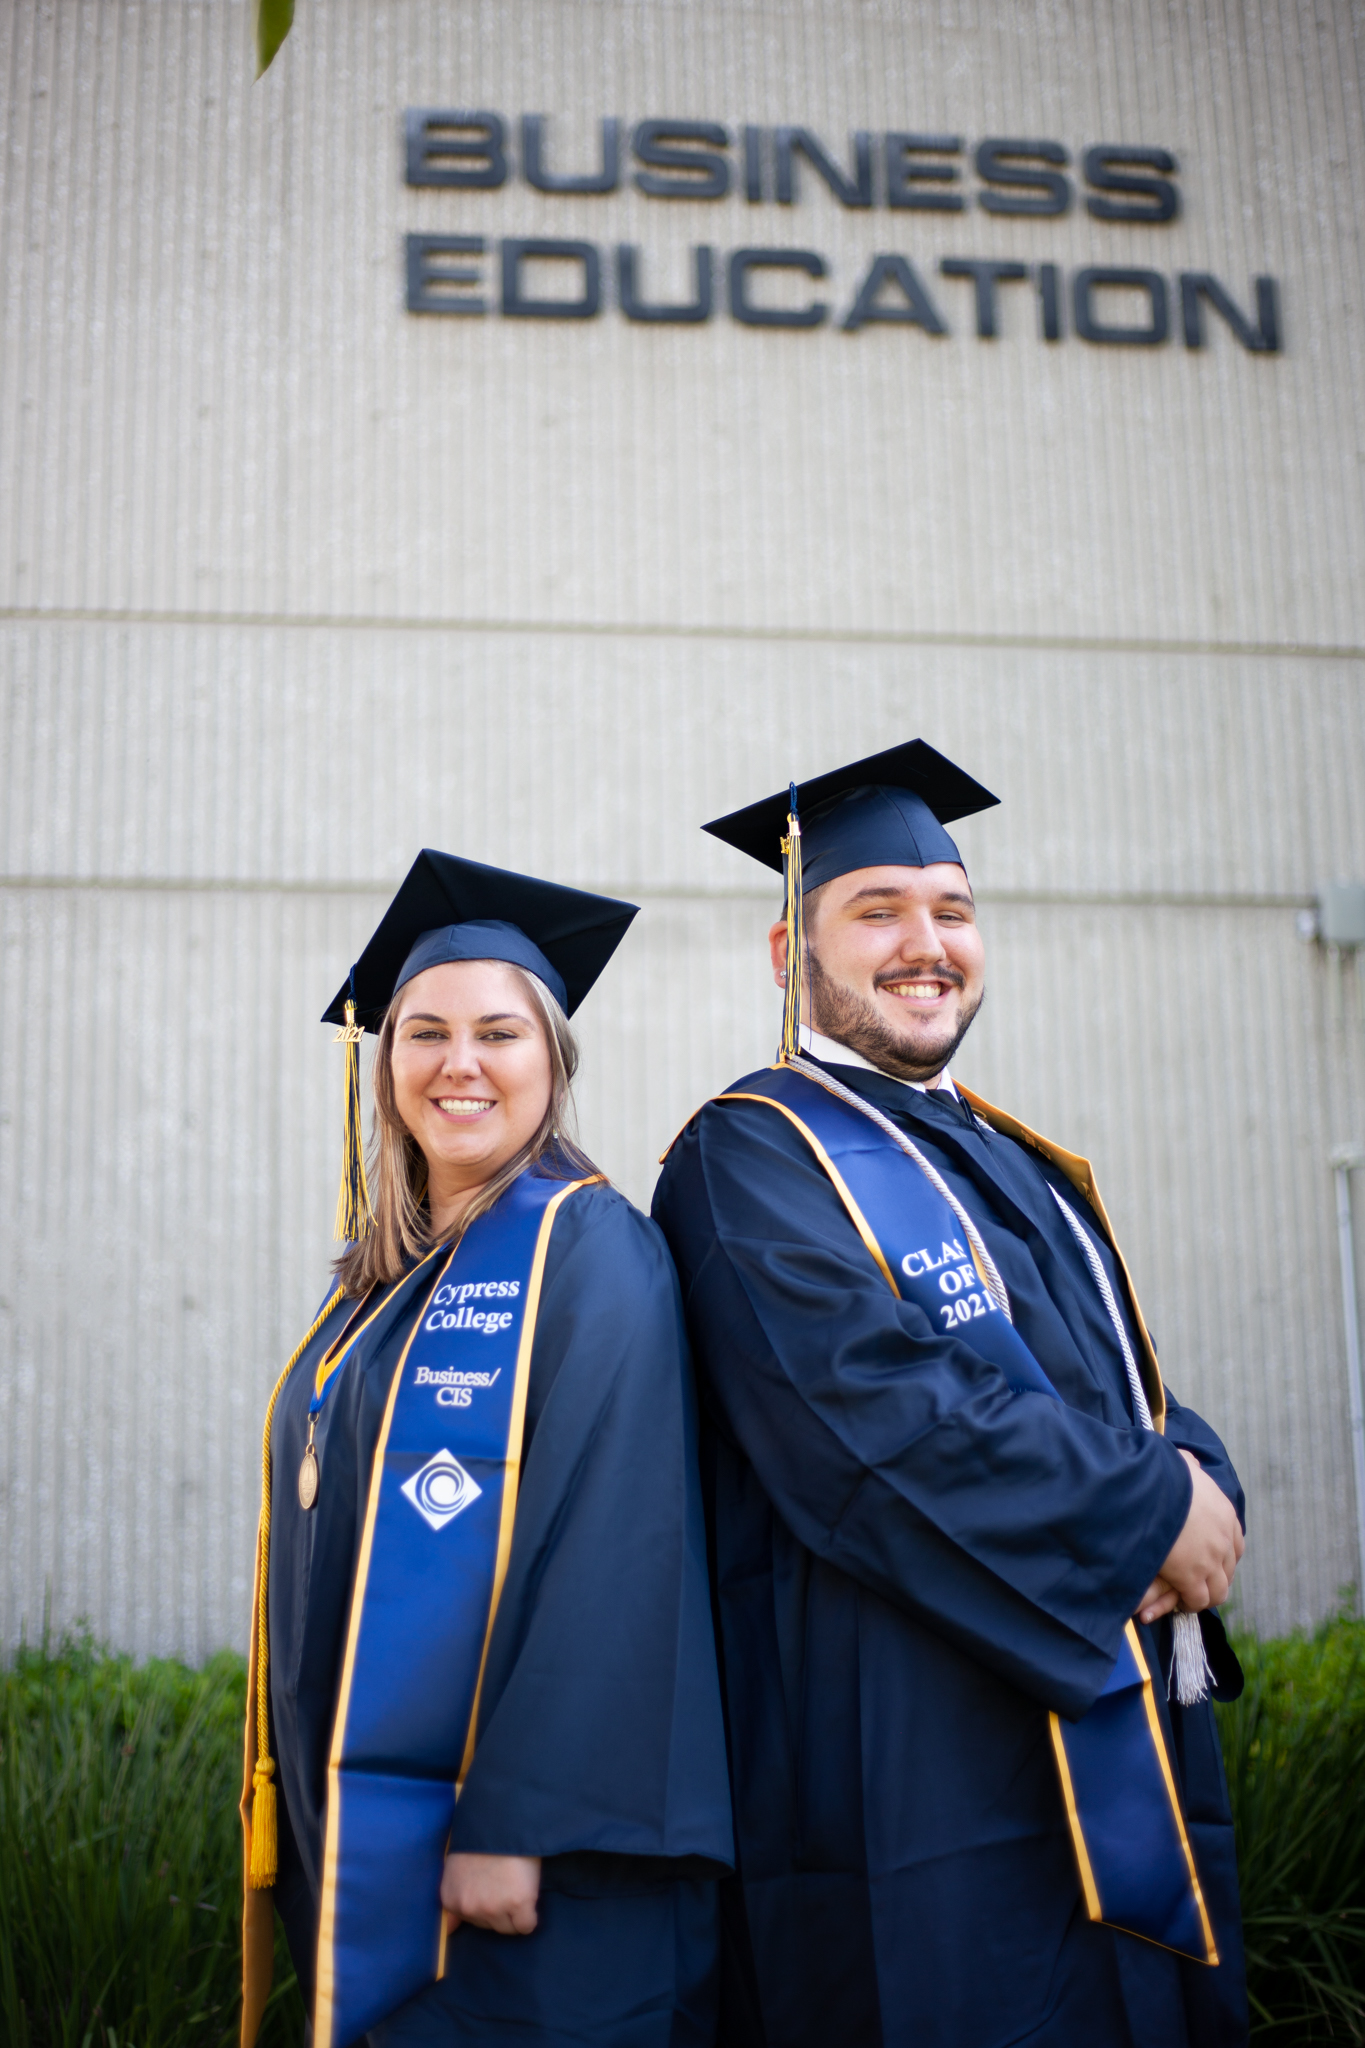 Business student Jacklyn Williamson poses with her brother, who will graduate with her in spring 2021.